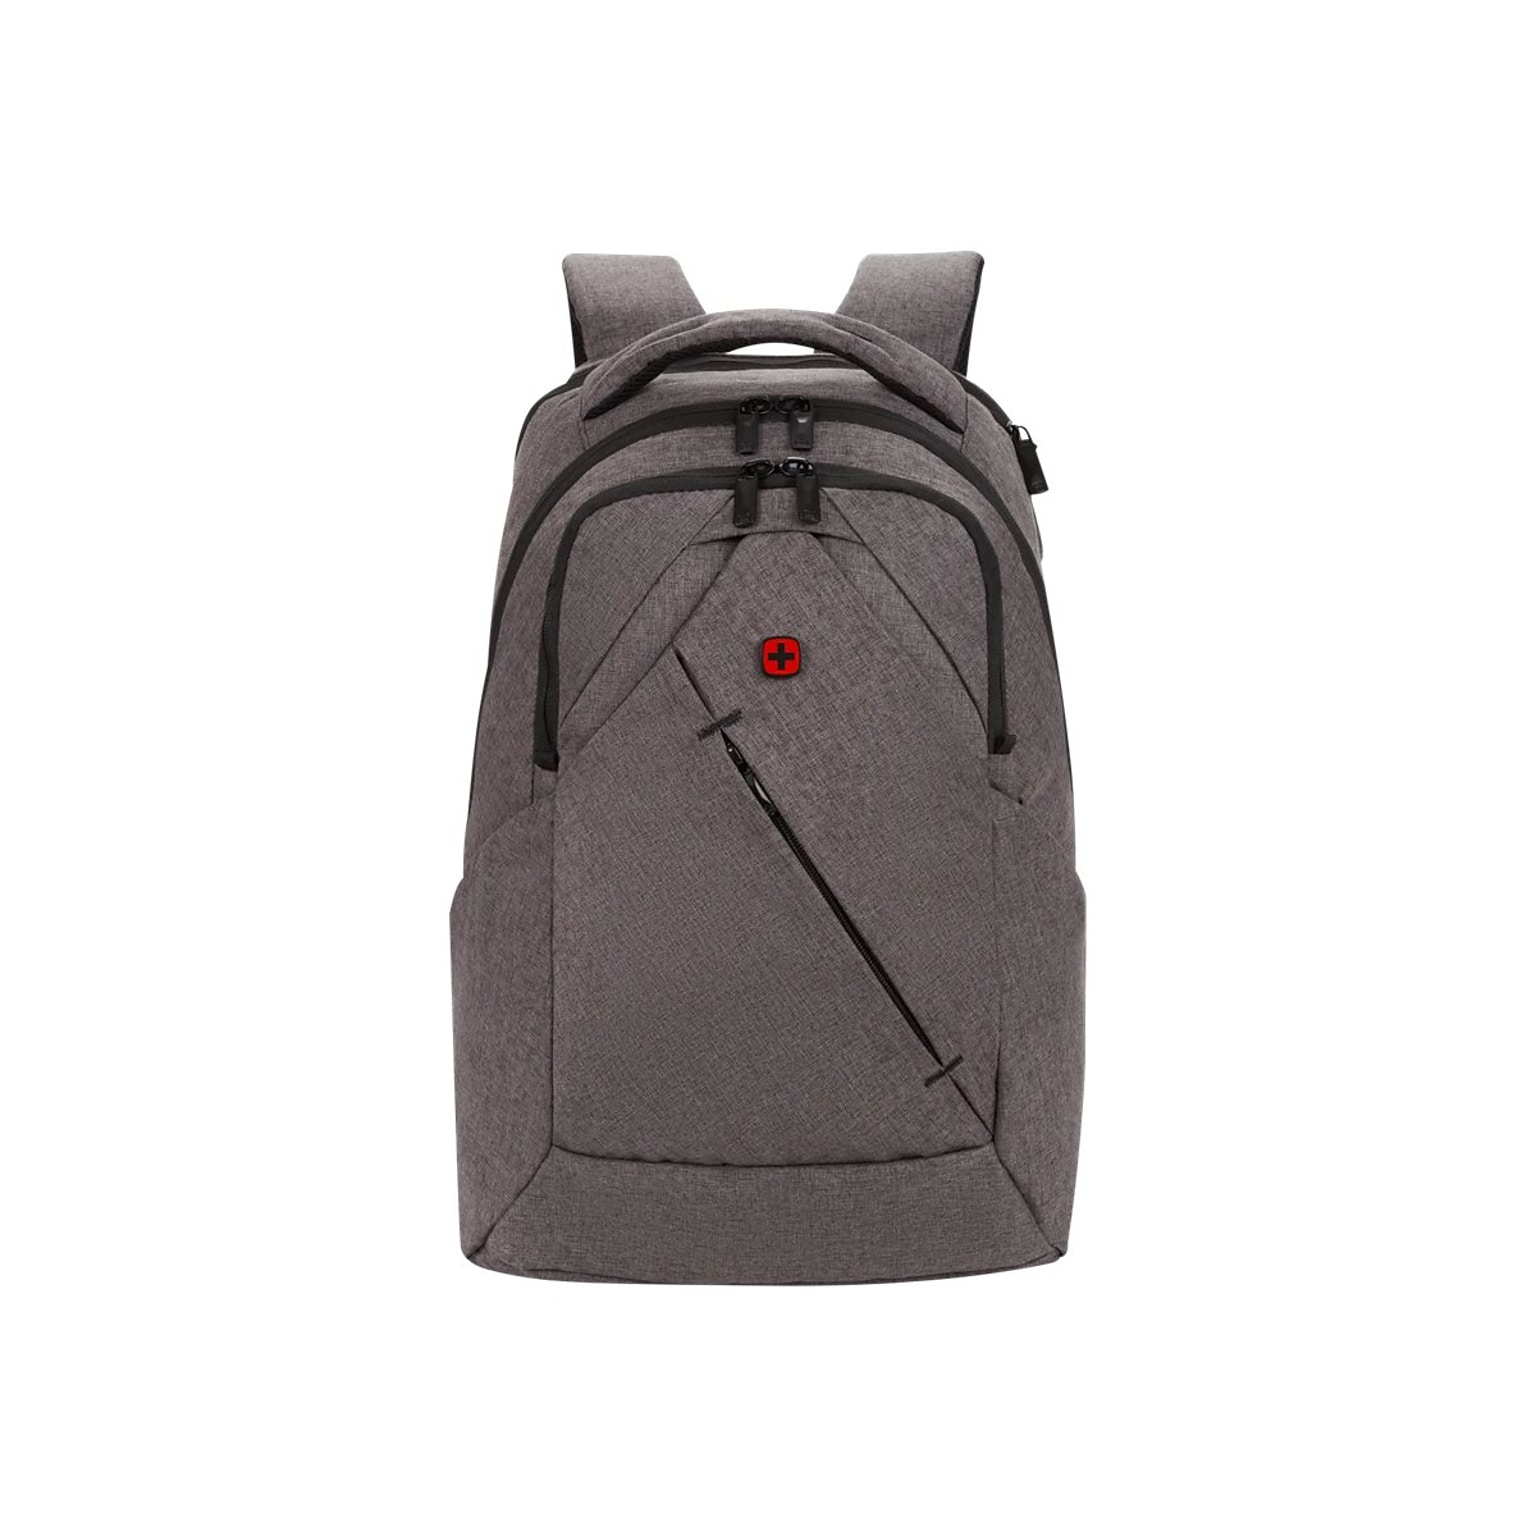 Wenger Laptop Backpack, Charcoal Heather Polyester (07613329059050)